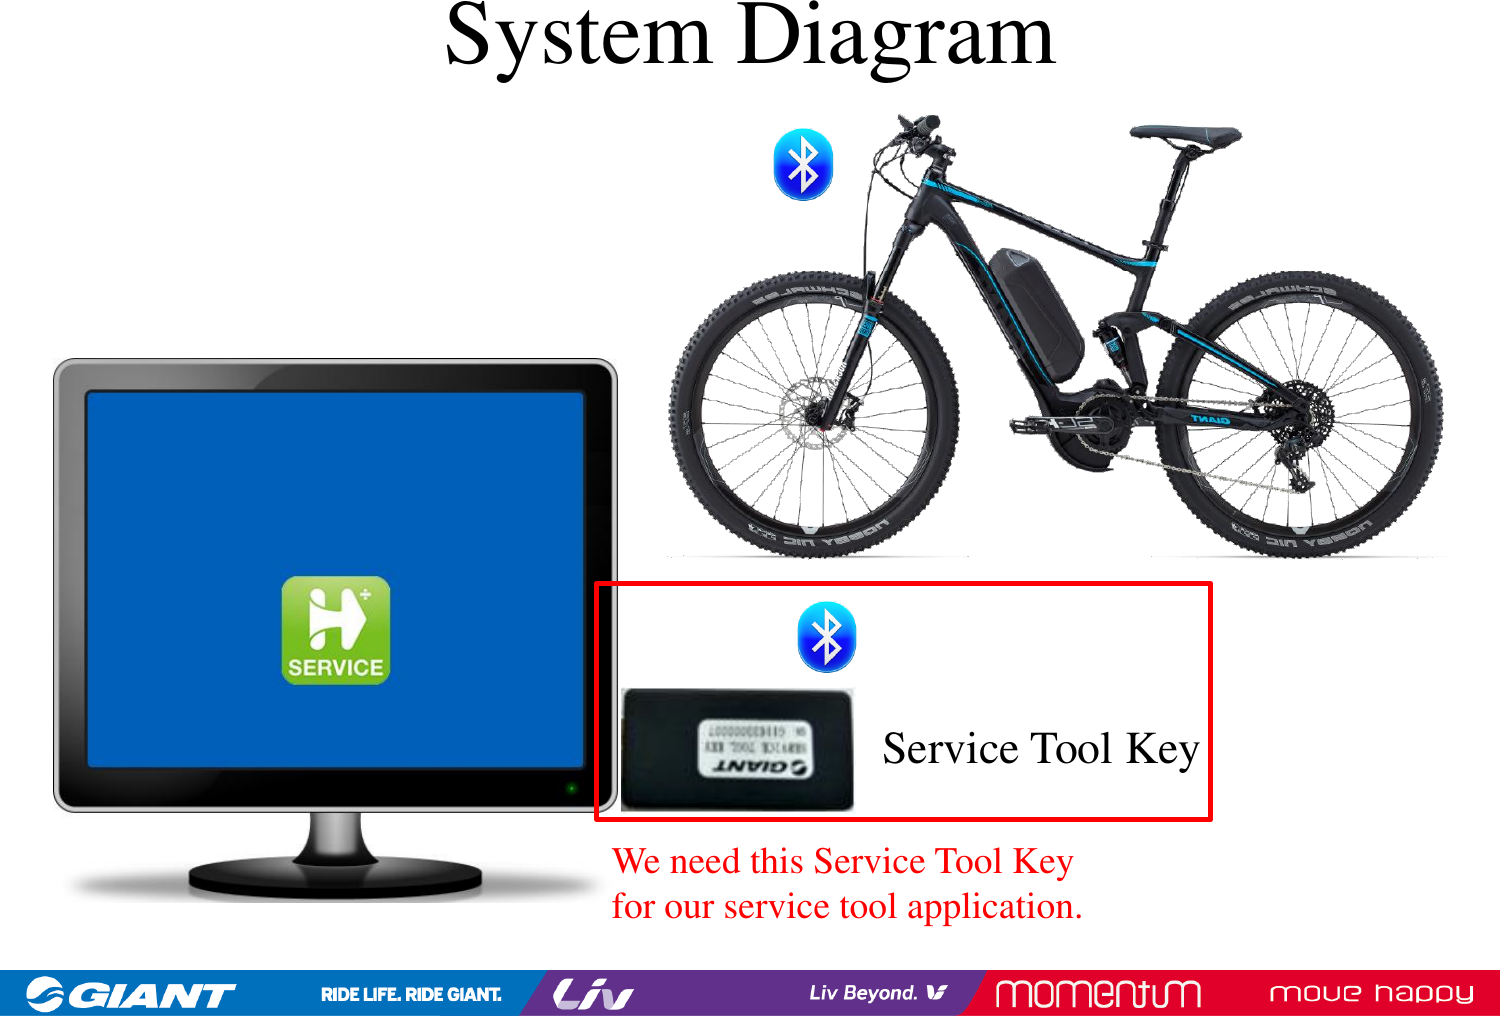 Giant Electric Vehicle SERVICETOOLKEY Service Tool Key User Manual 1